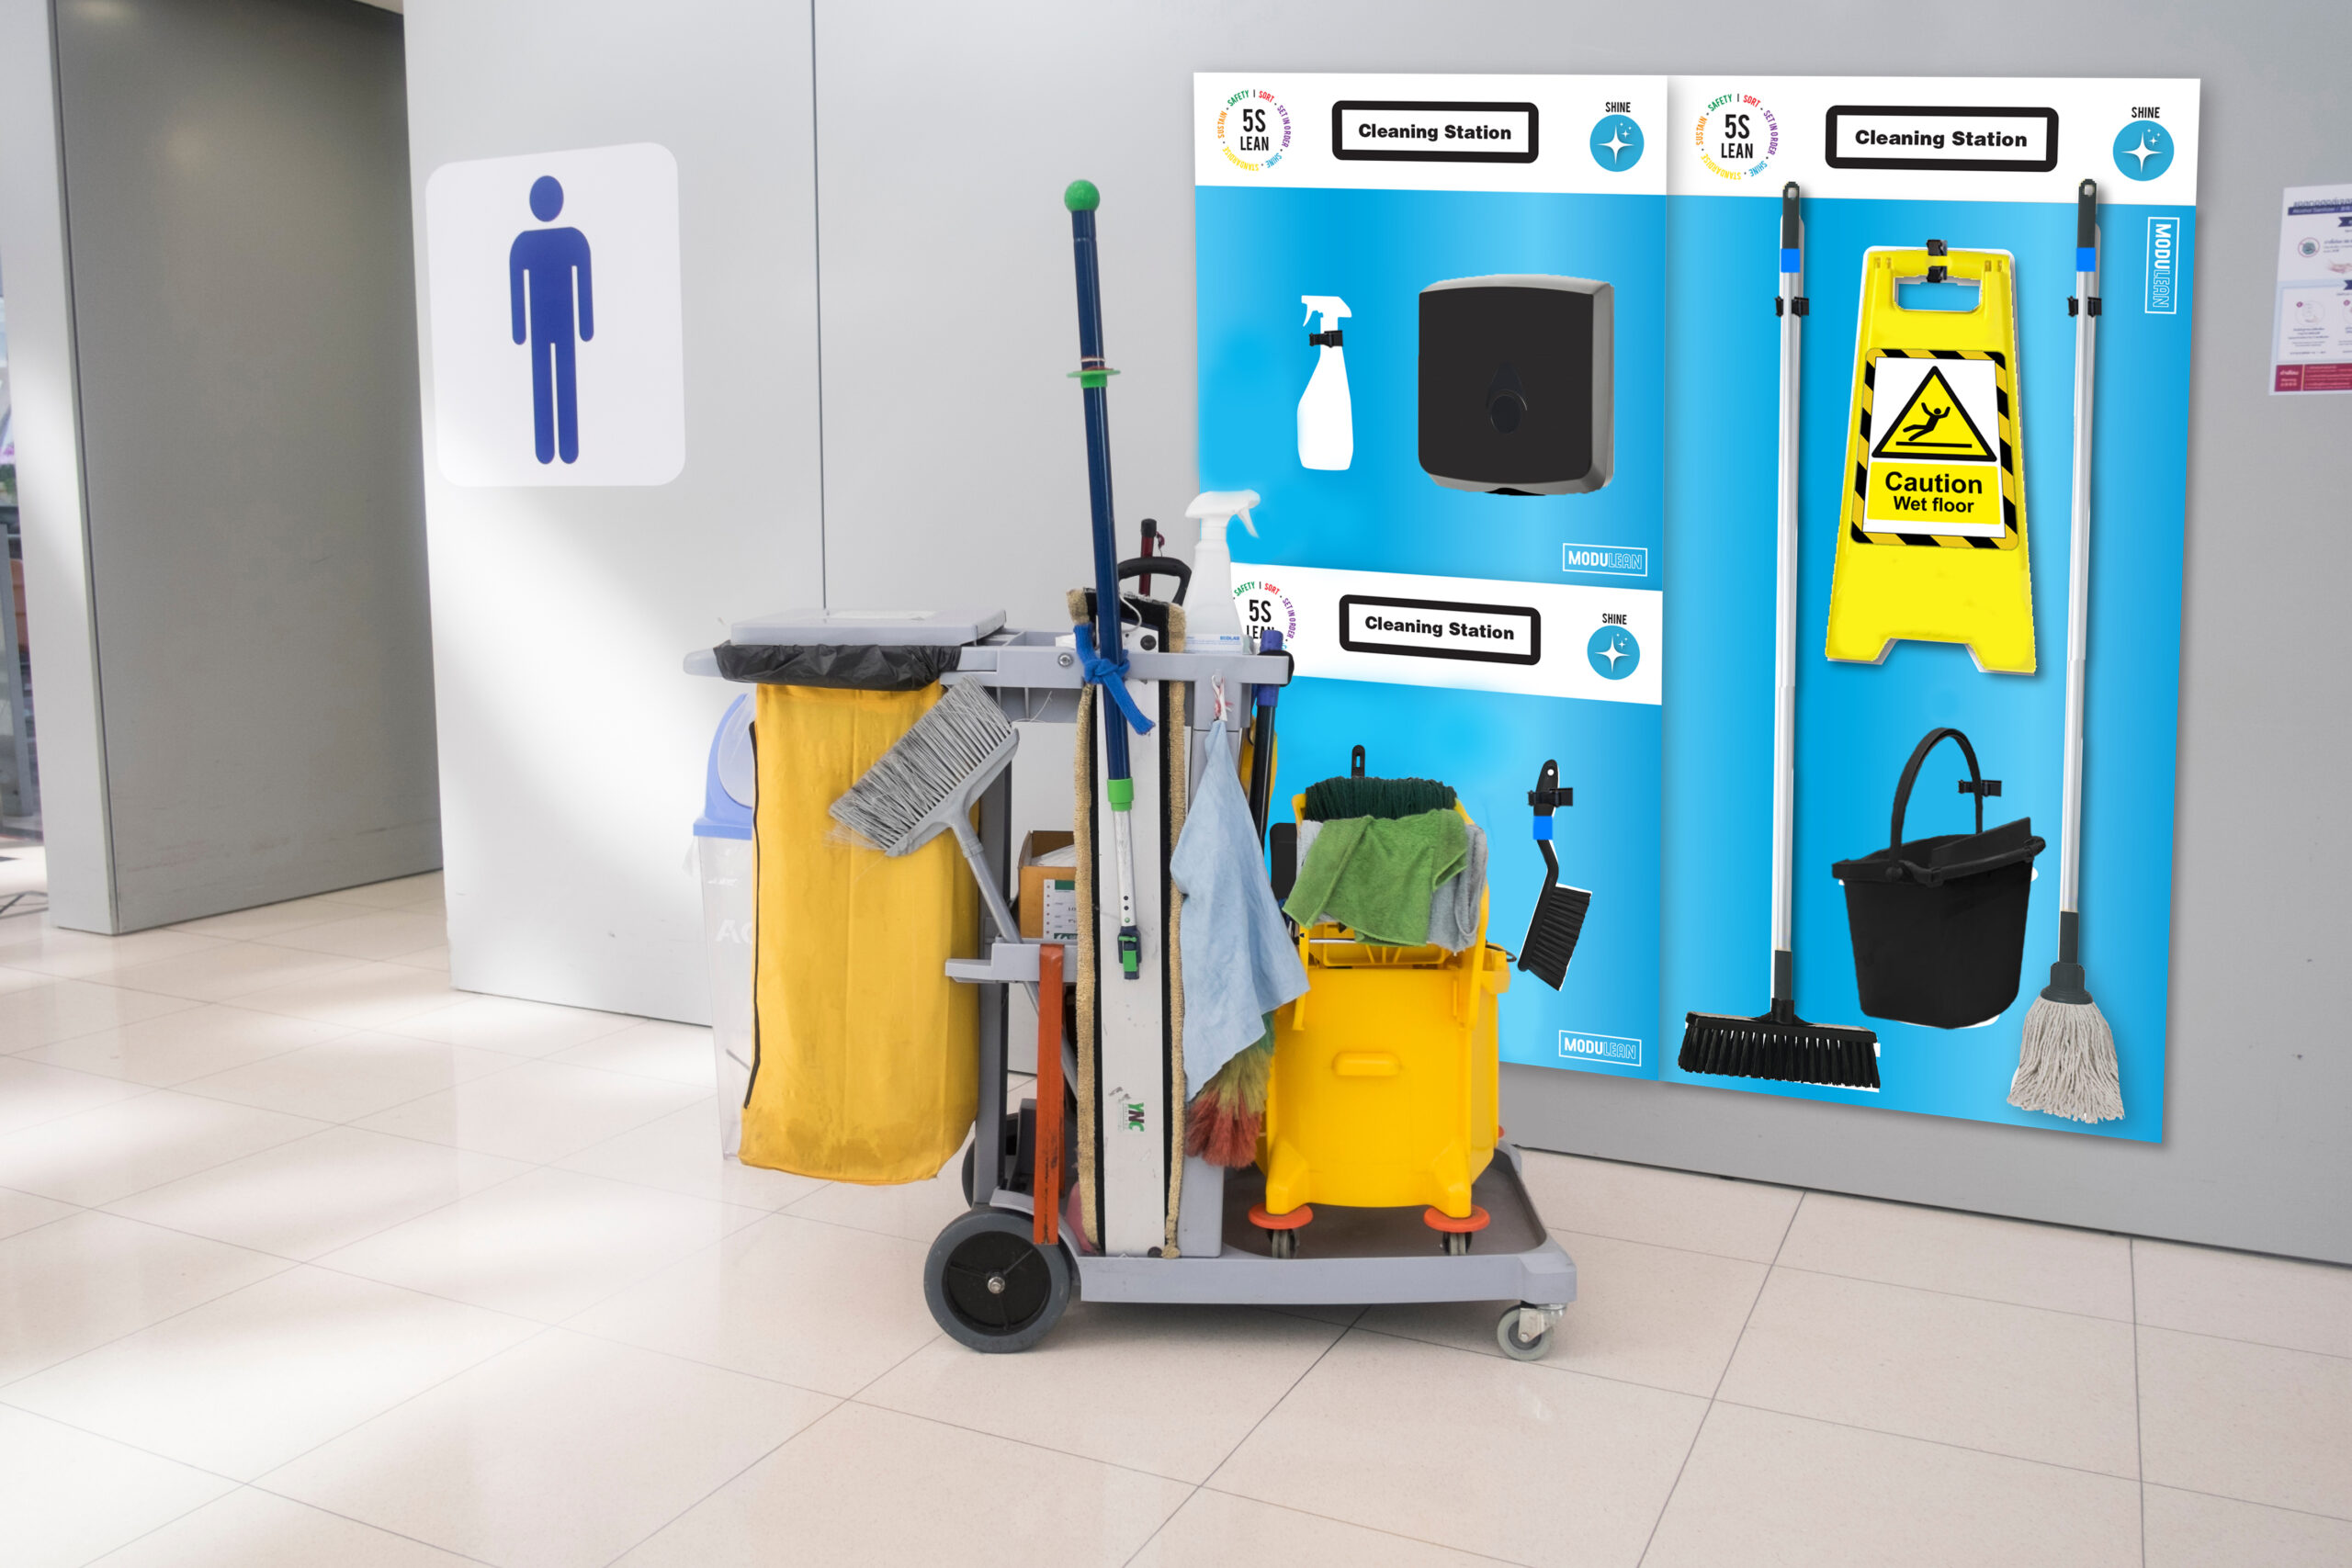 5s shadow boards display modulean modulean™ cleaning station janitor toilet maintenance cleaning boards